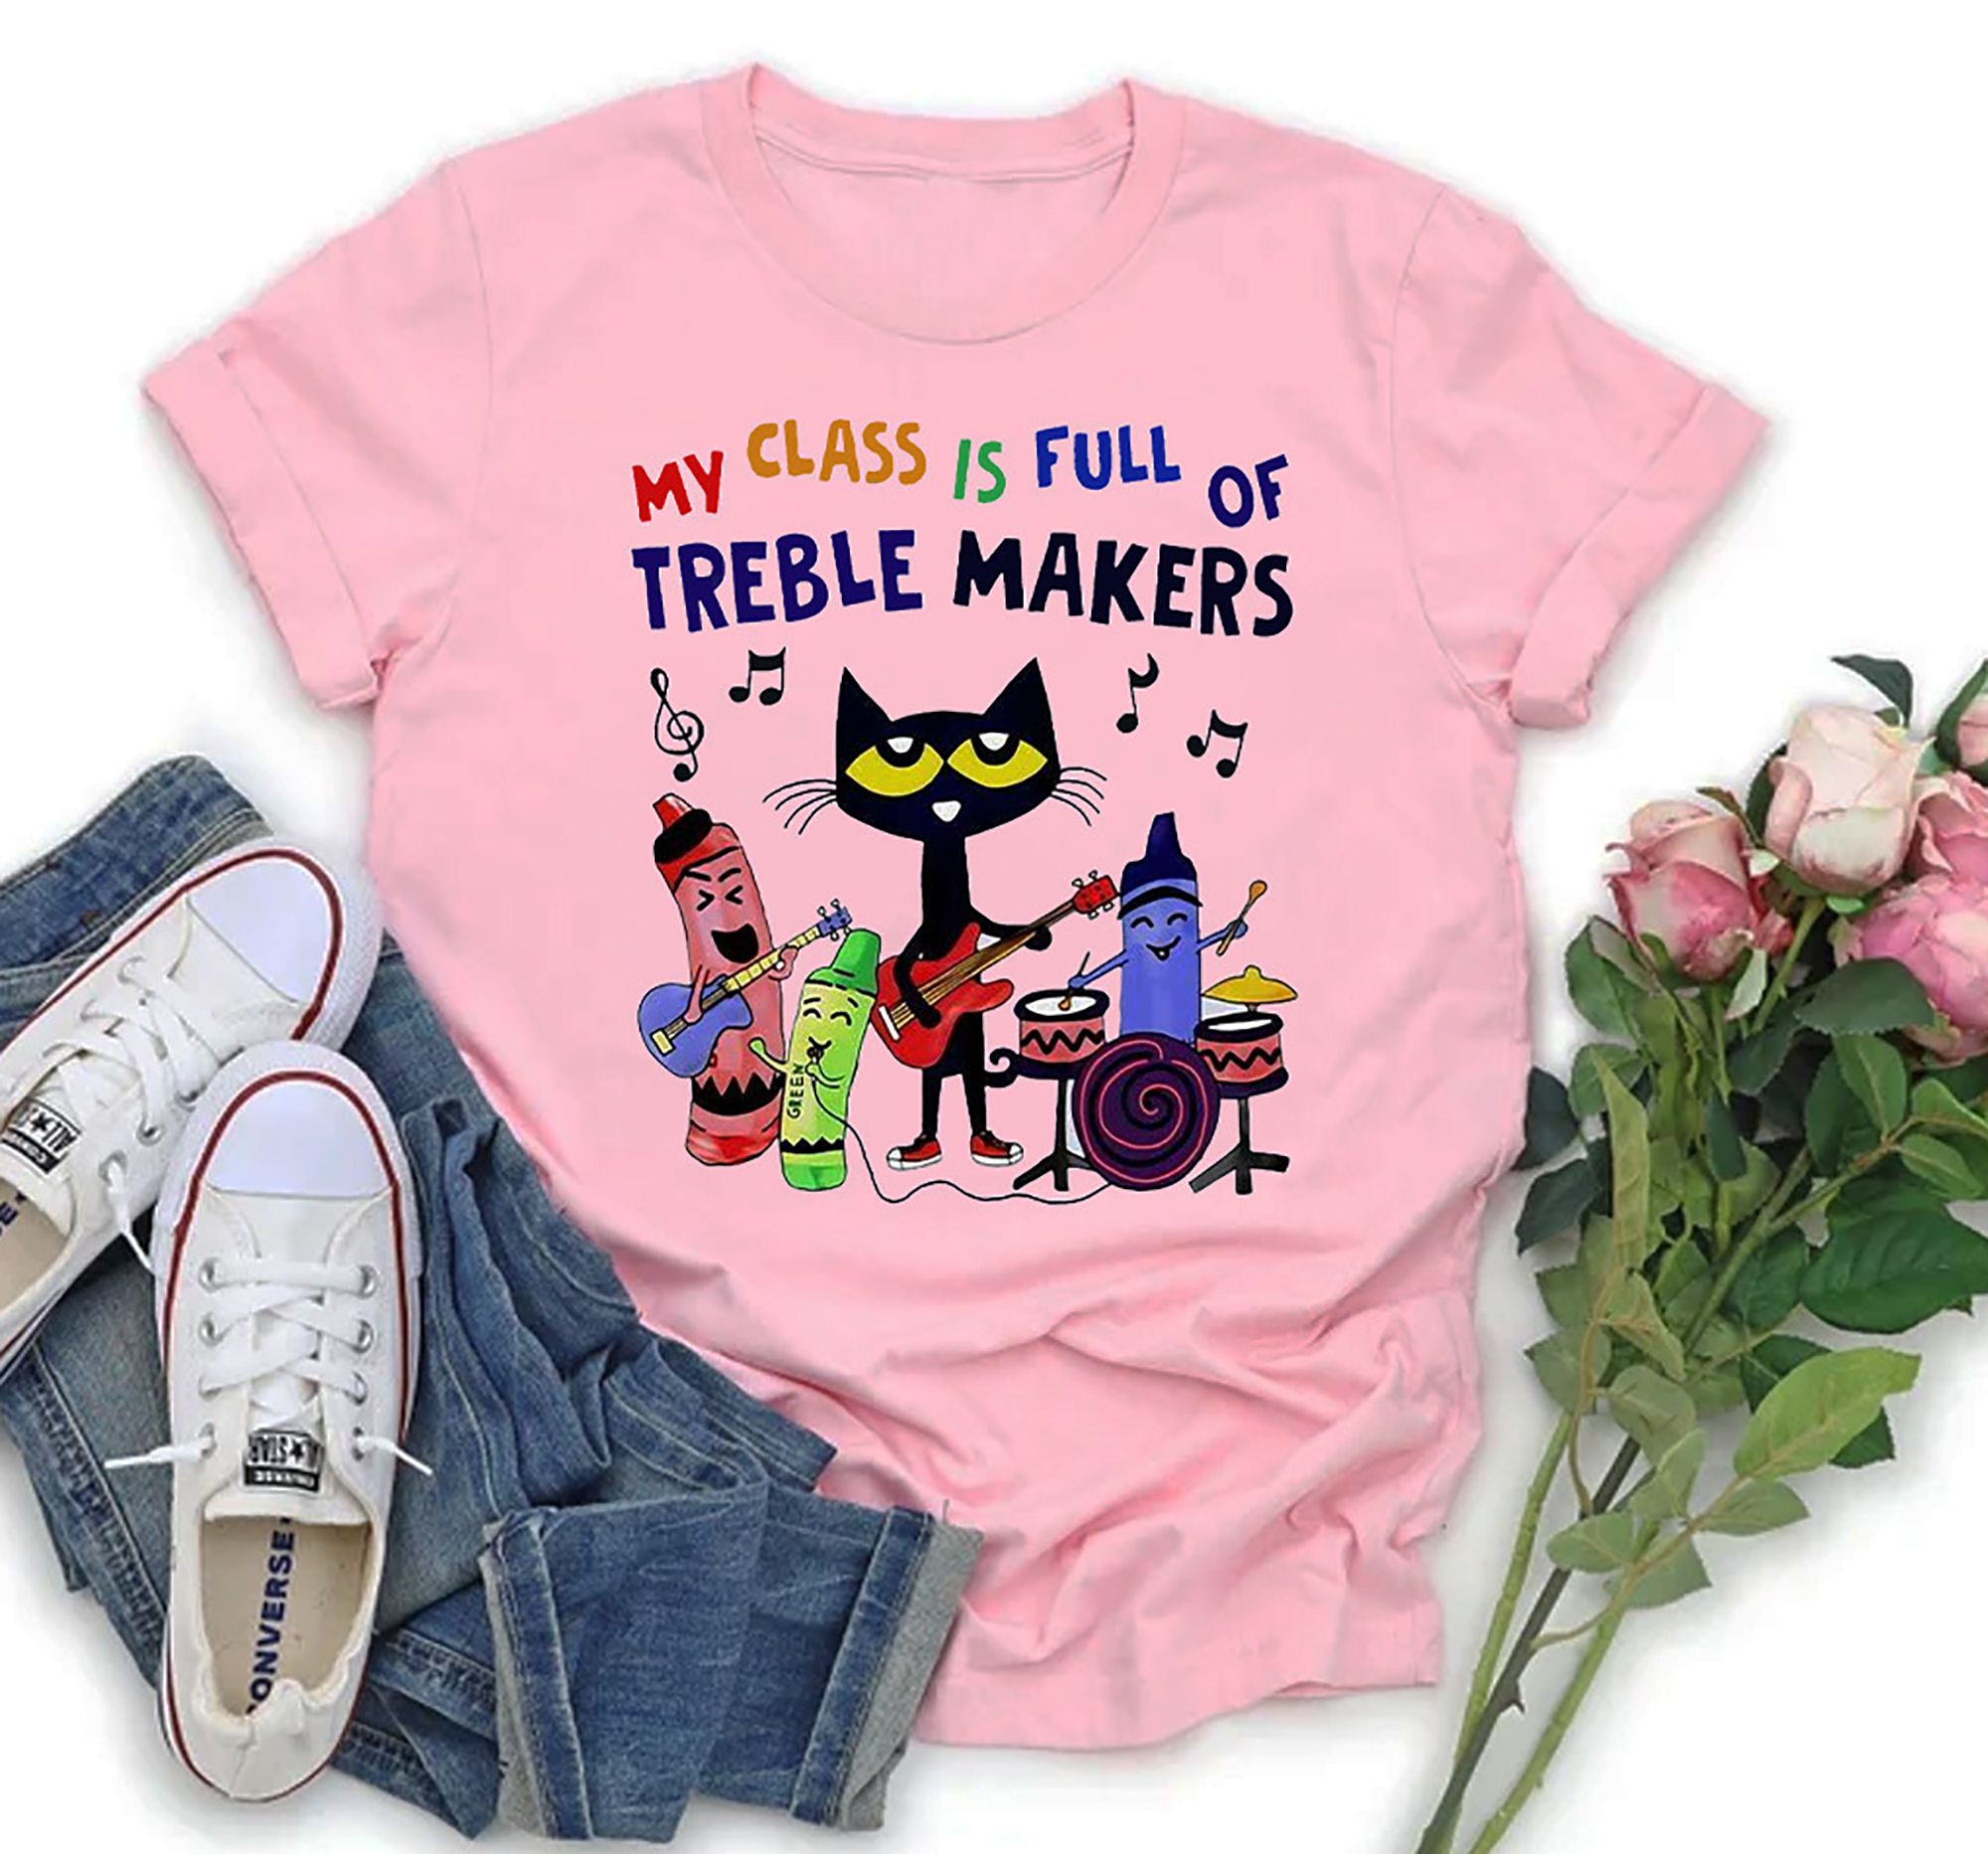 Pete The Cat shirt, My Class Is Full Of Treble Makers, Do Your Best Shirt, Its All Good, Back To School Shirt, Book Are Groovy Tee